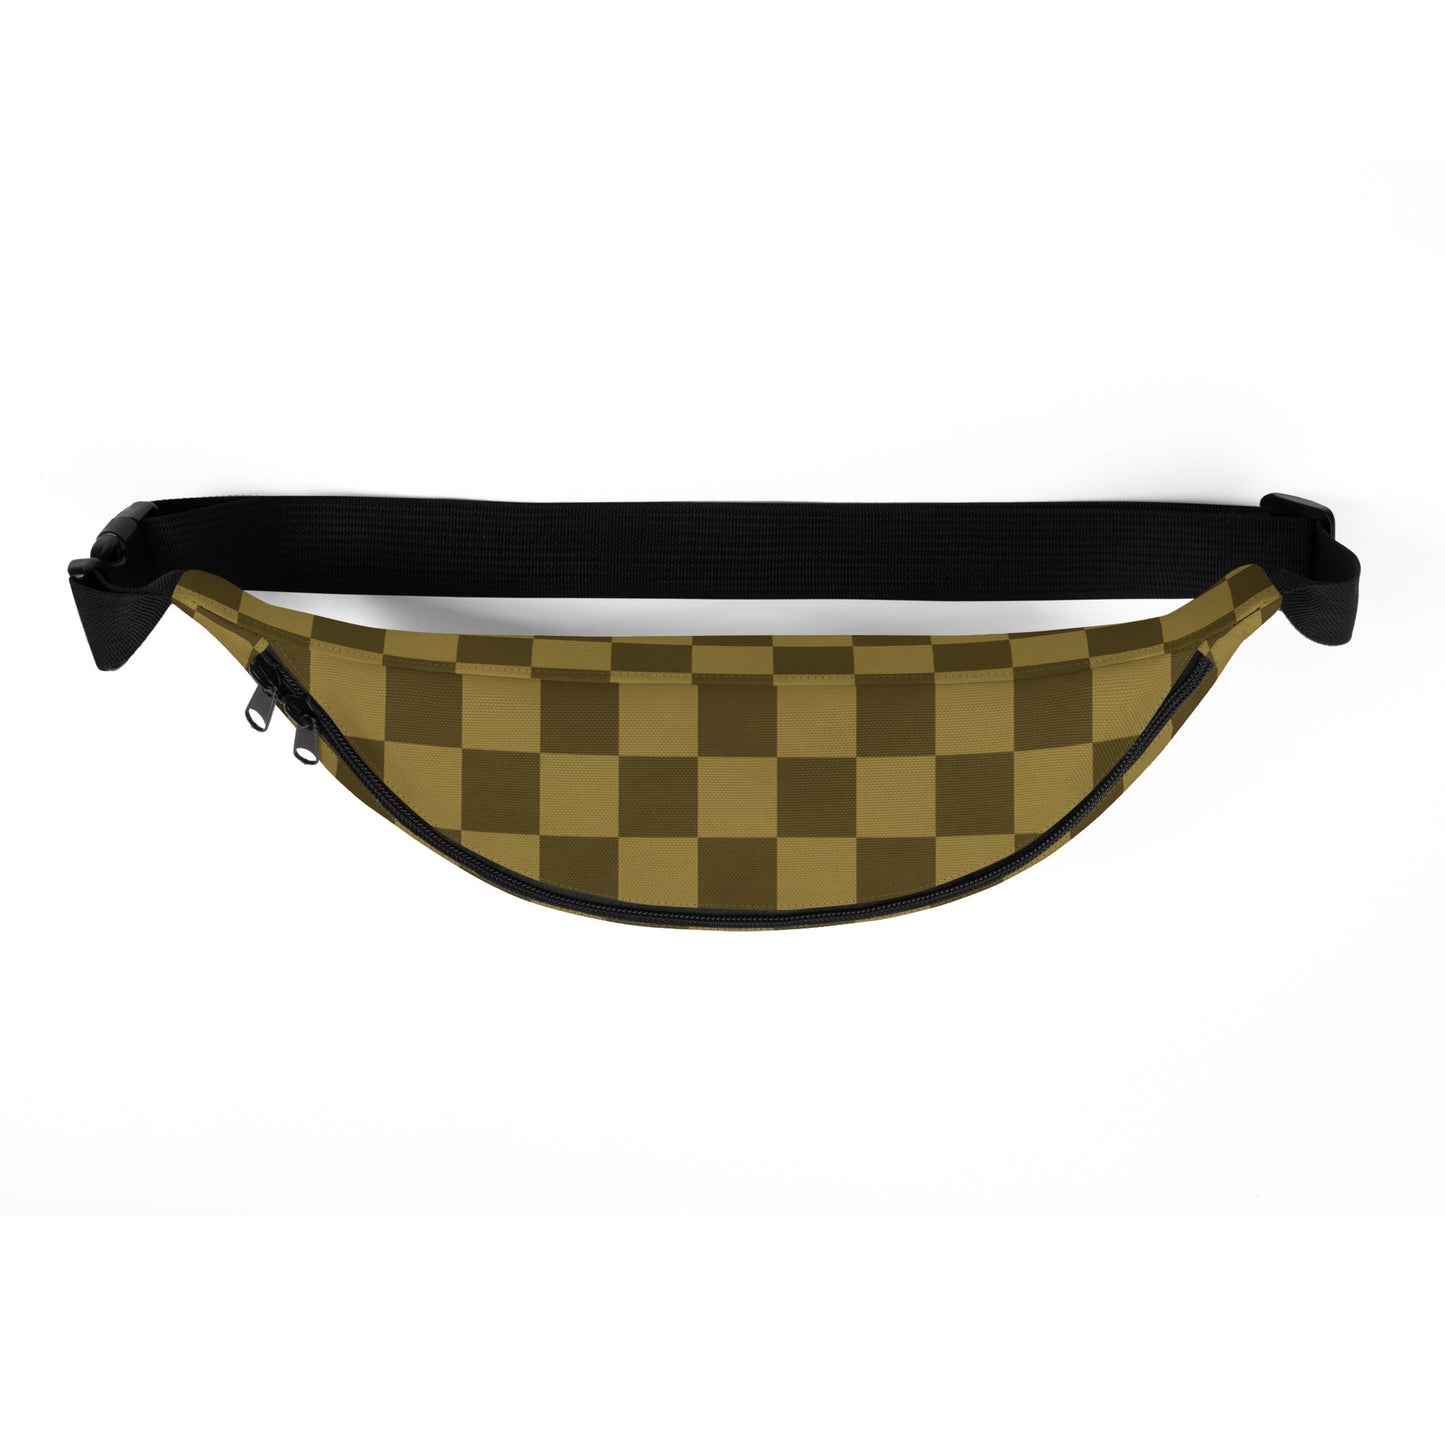 Wempy Dyocta Koto Signature Casual - Sustainably Made Fanny Pack